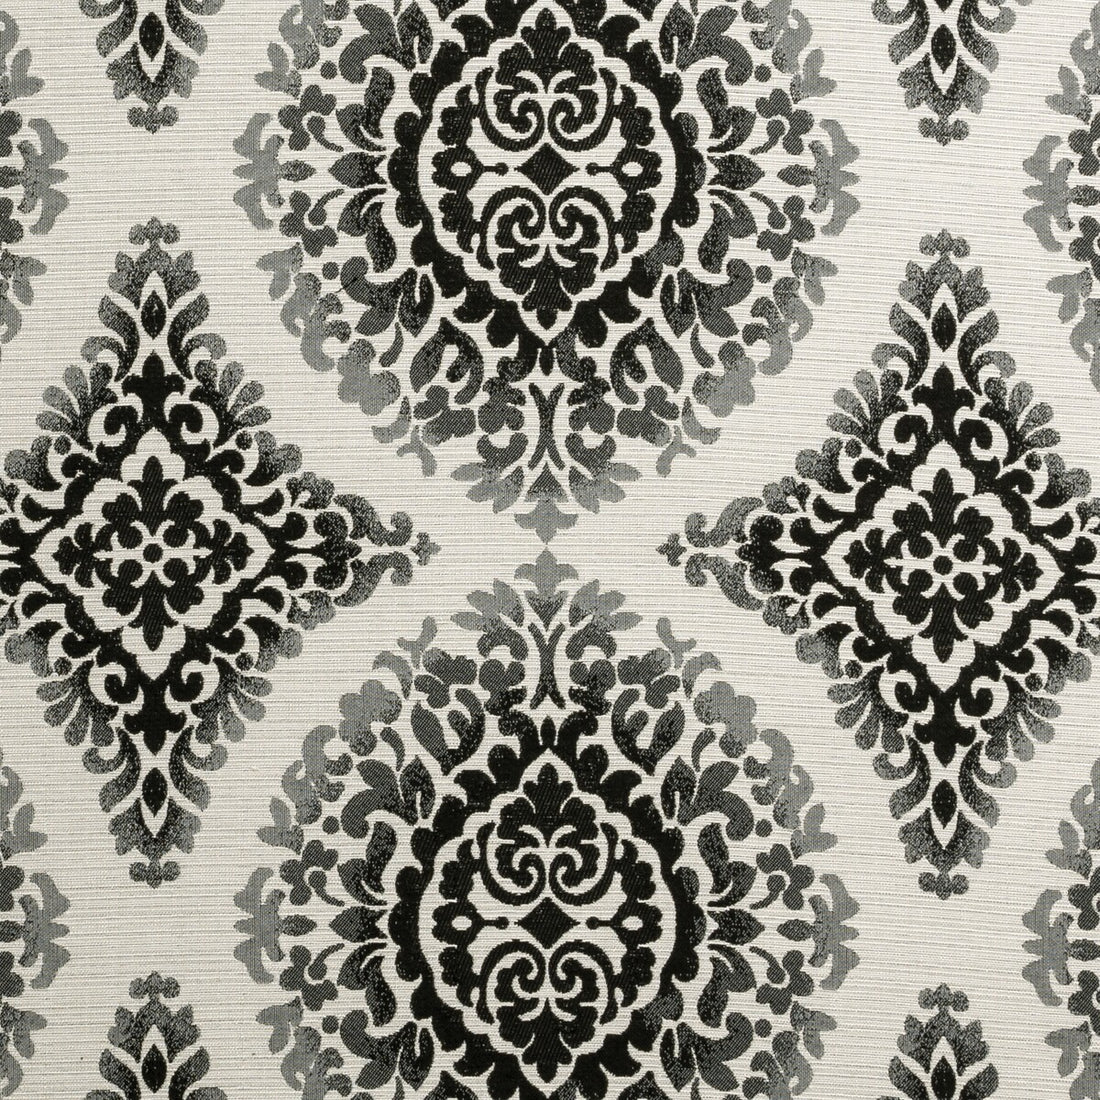 Bw1024 fabric in black/white color - pattern F0897/01.CAC.0 - by Clarke And Clarke in the Clarke &amp; Clarke Black + White collection